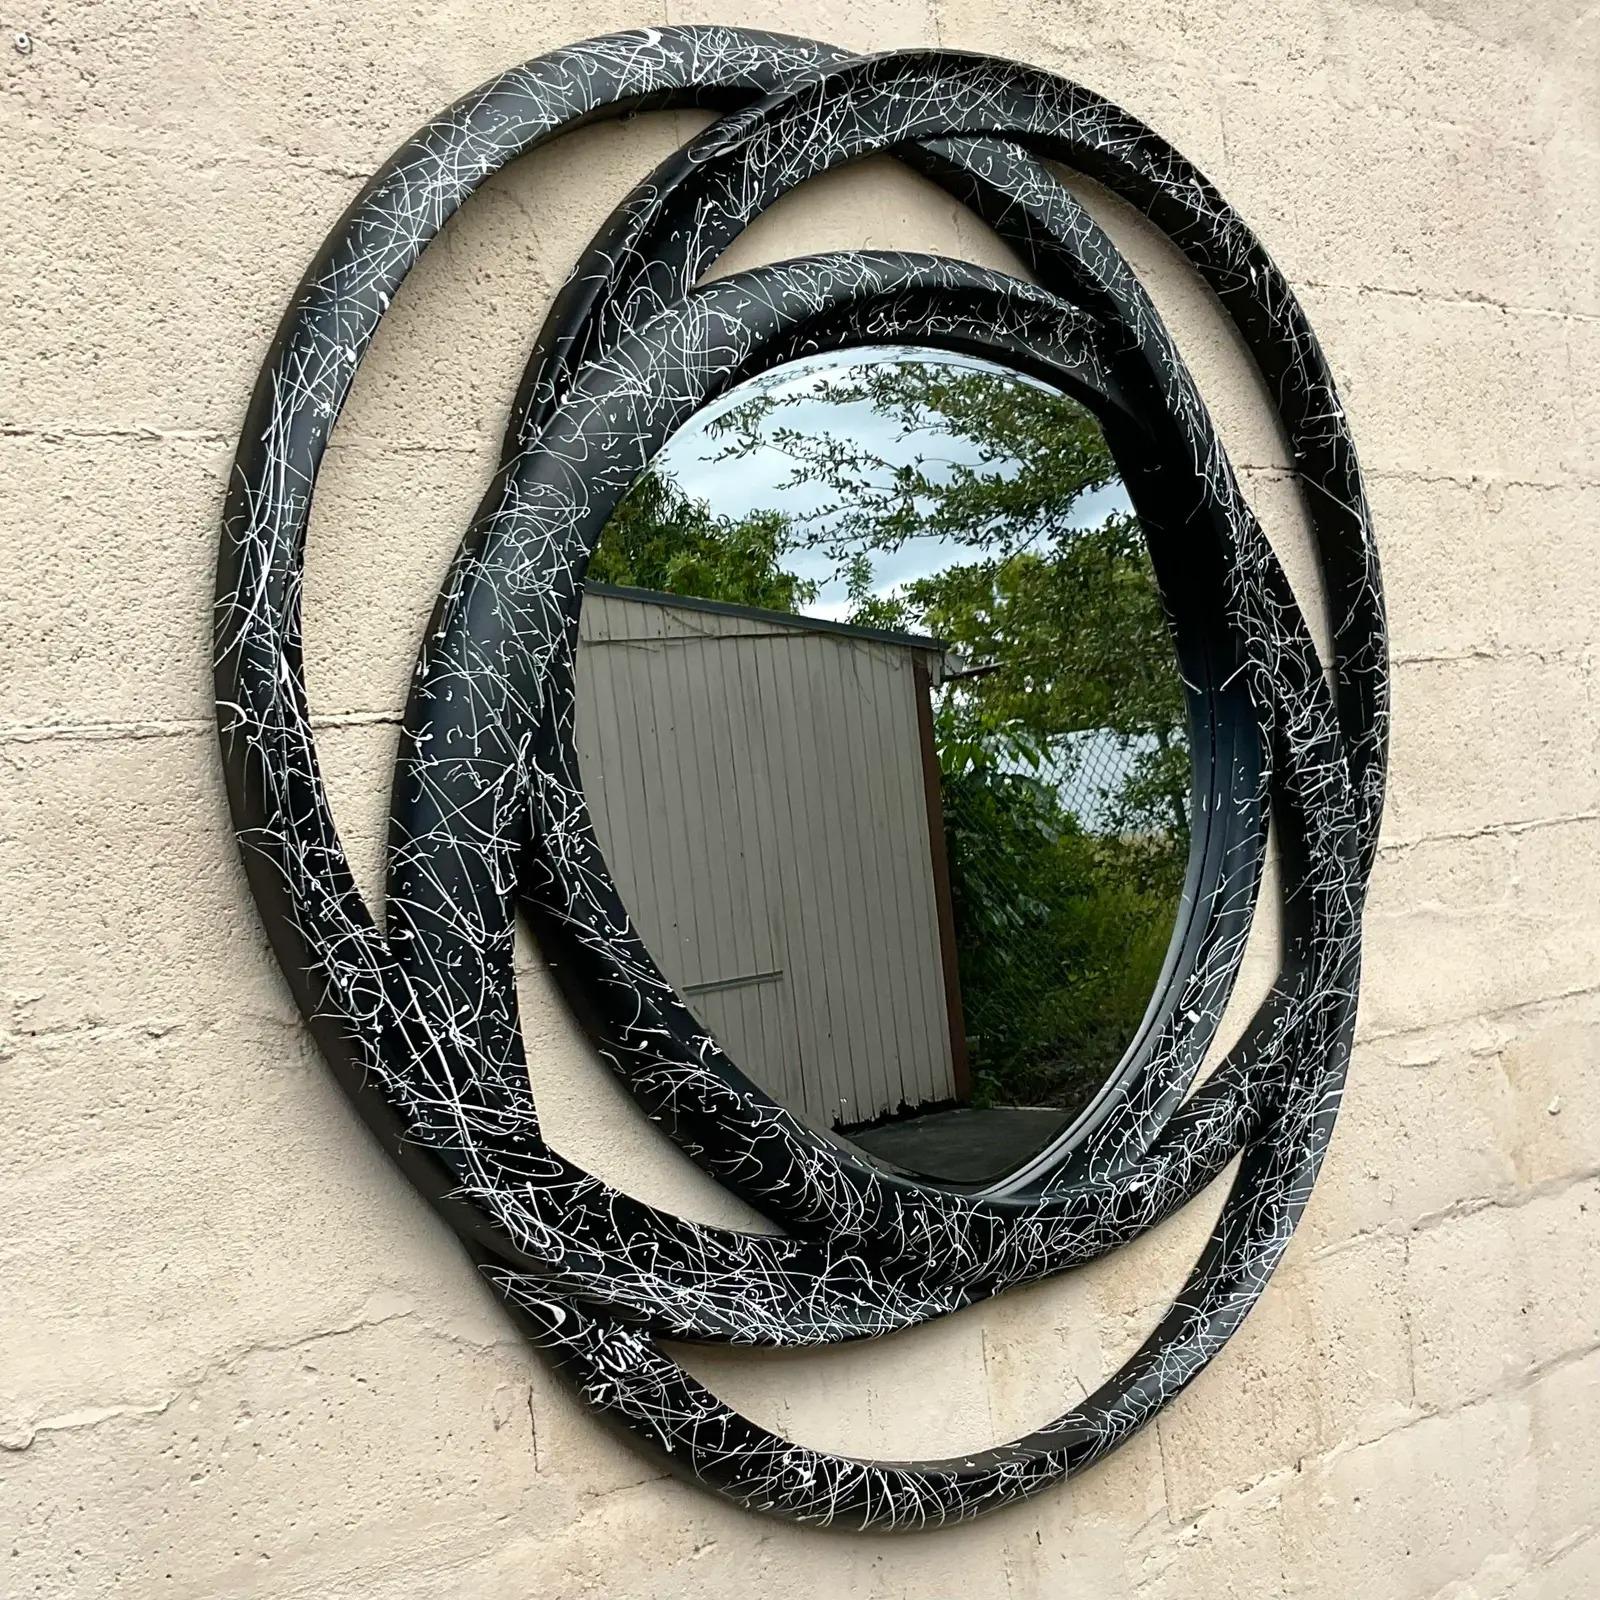 A fantastic vintage monumental wall mirror. Fabulous rings design with a splatter paint finish. Perfect as is or re-imagine in a new color! You decide! Acquired from a Palm Beach estate.